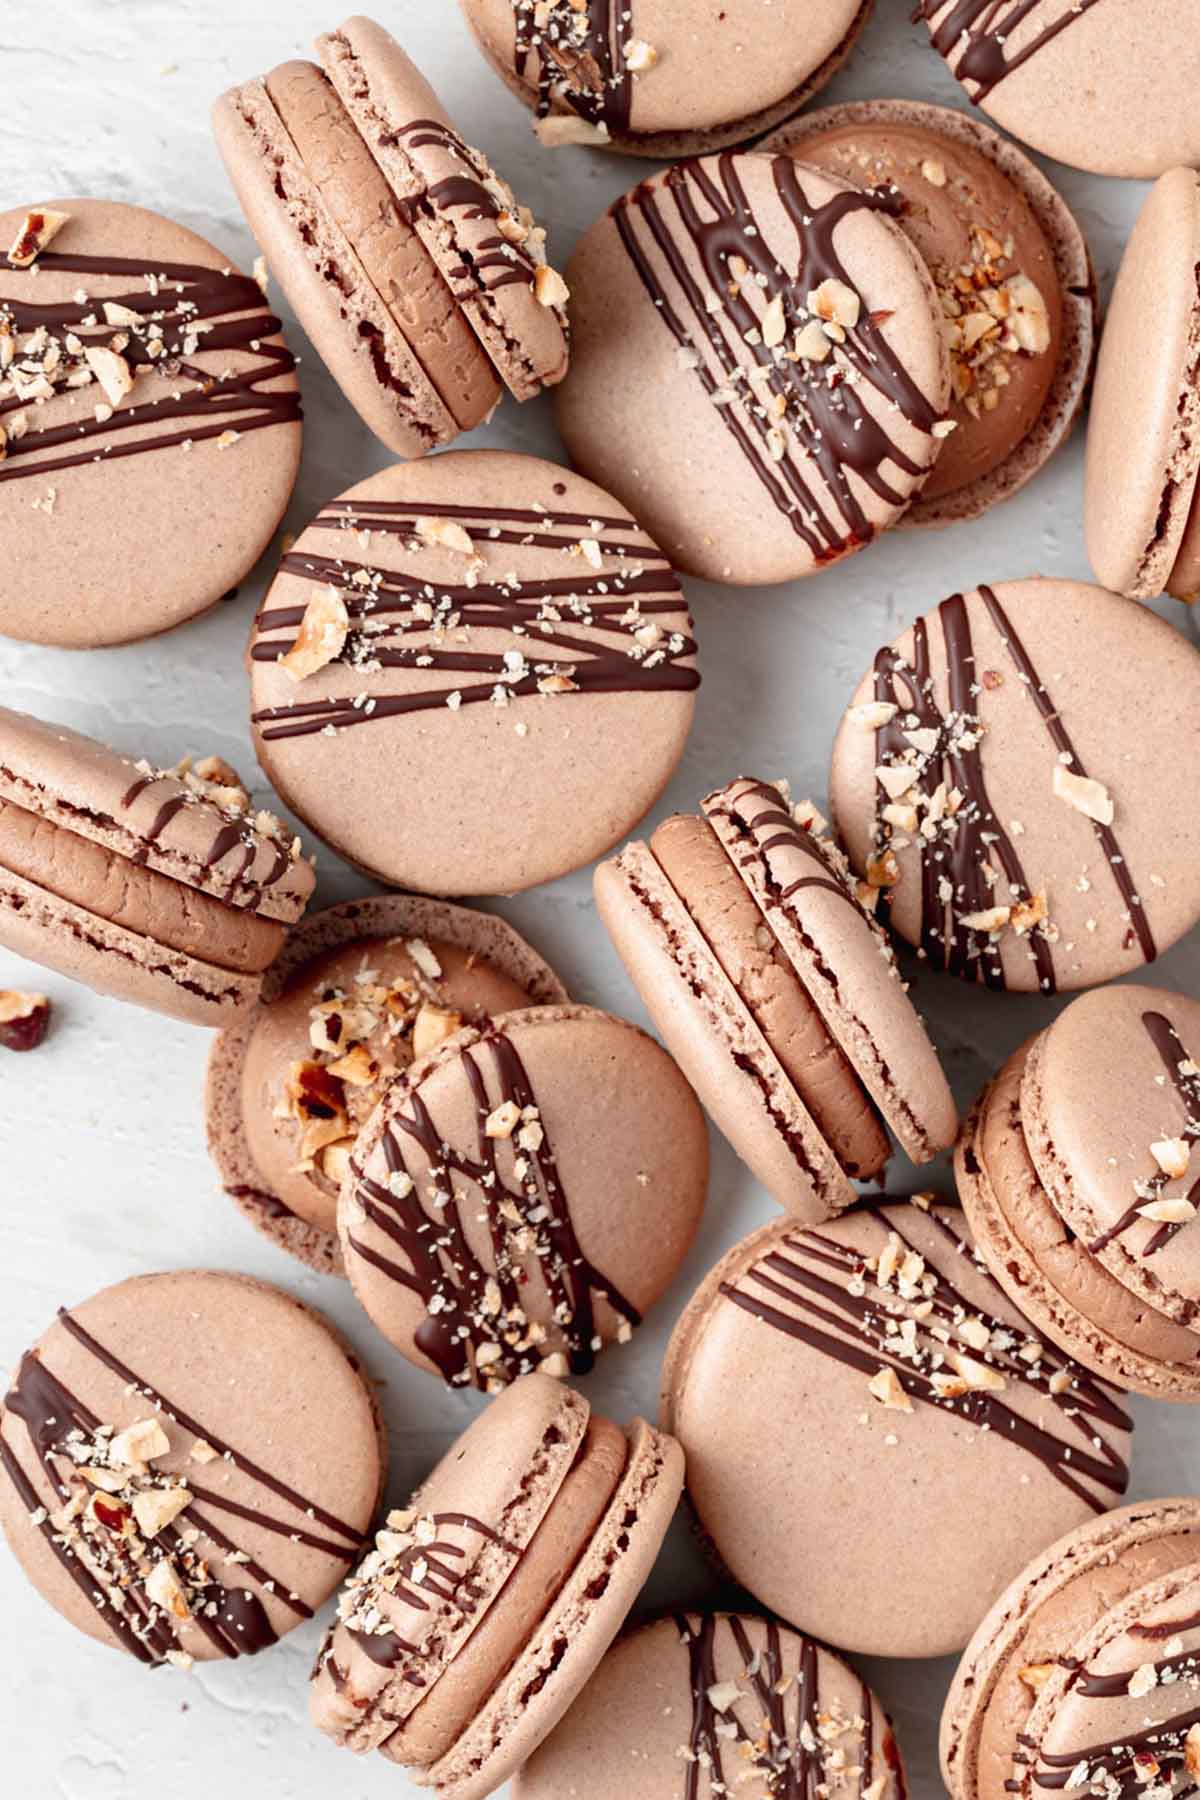 Nutella macaron shells drizzled with chocolate.